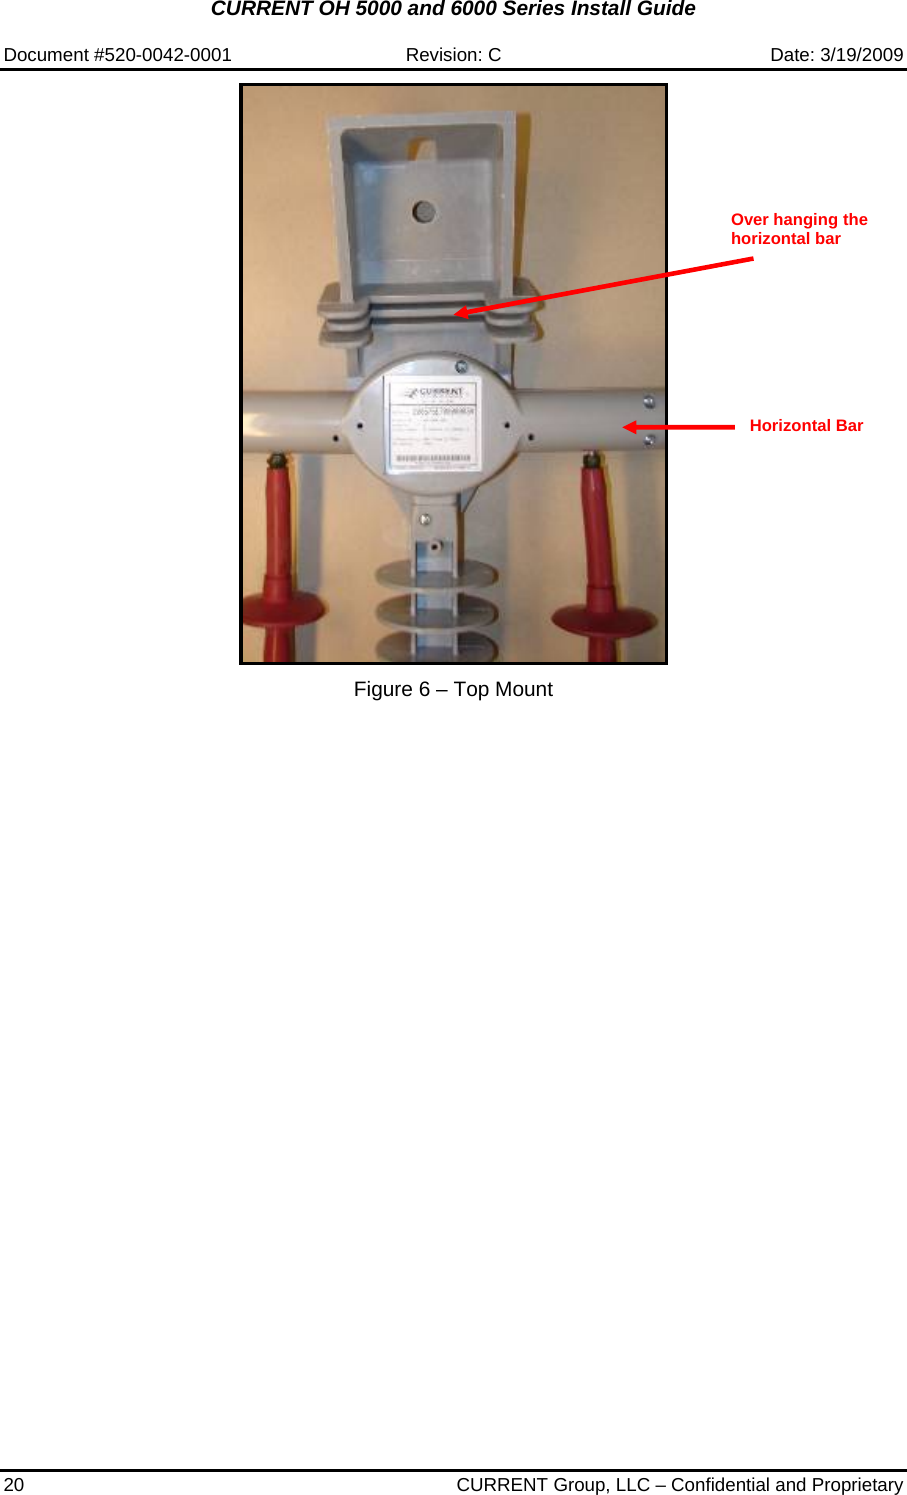 CURRENT OH 5000 and 6000 Series Install Guide  Document #520-0042-0001  Revision: C  Date: 3/19/2009 20  CURRENT Group, LLC – Confidential and Proprietary    Figure 6 – Top Mount  Over hanging the horizontal bar Horizontal Bar 